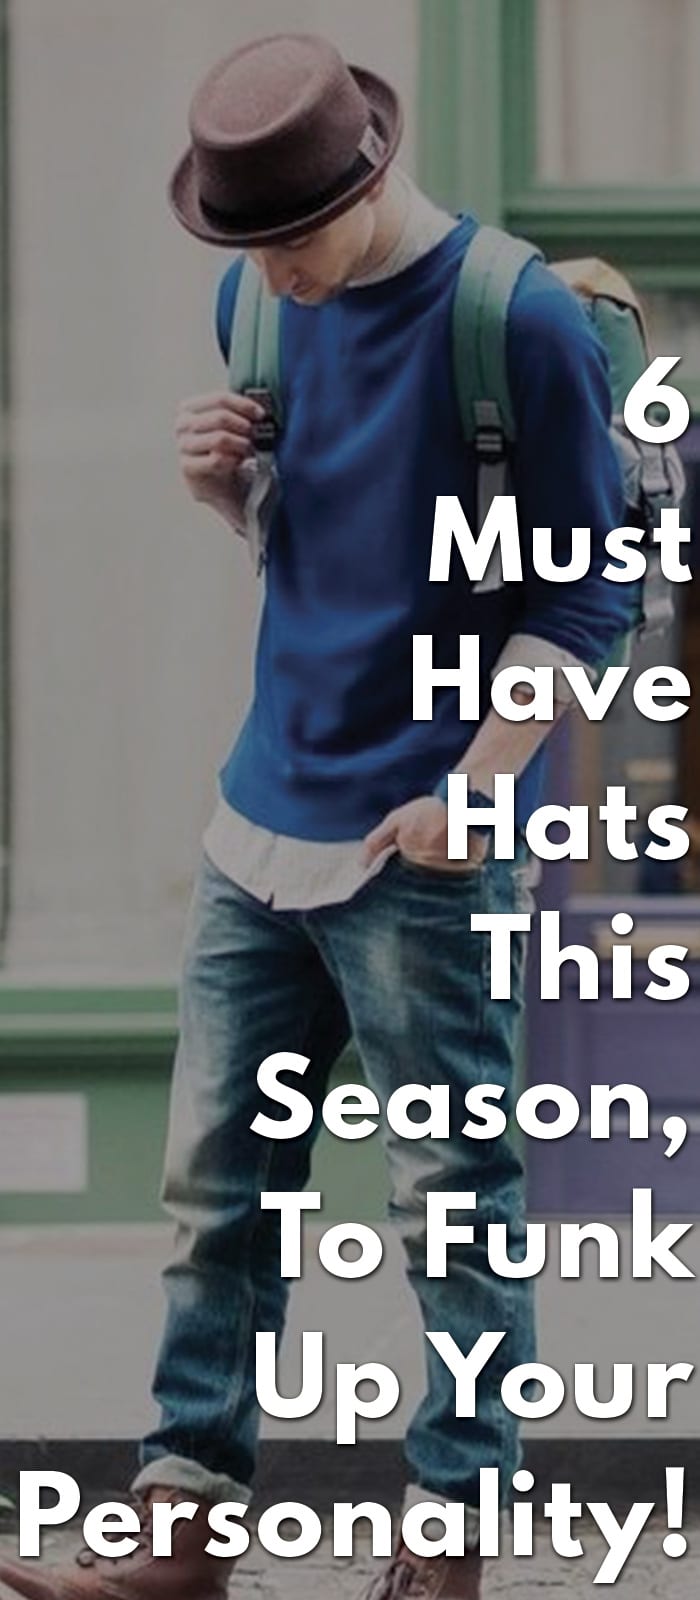 6-Must-Have-Hats-This-Season,-To-Funk-Up-Your-Personality!